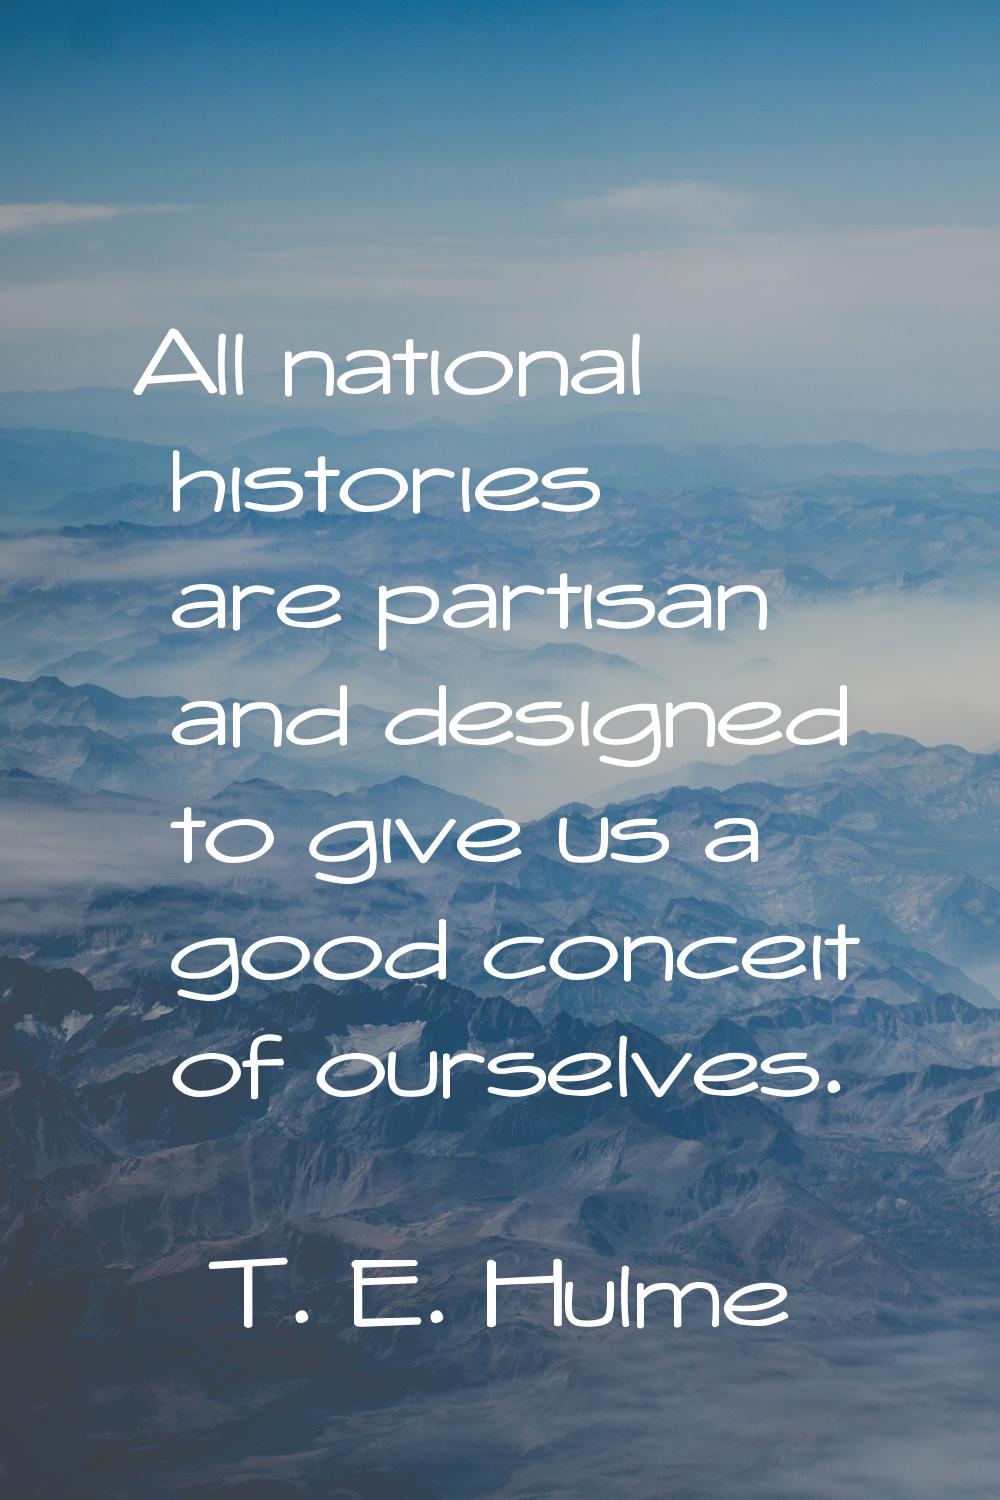 All national histories are partisan and designed to give us a good conceit of ourselves.